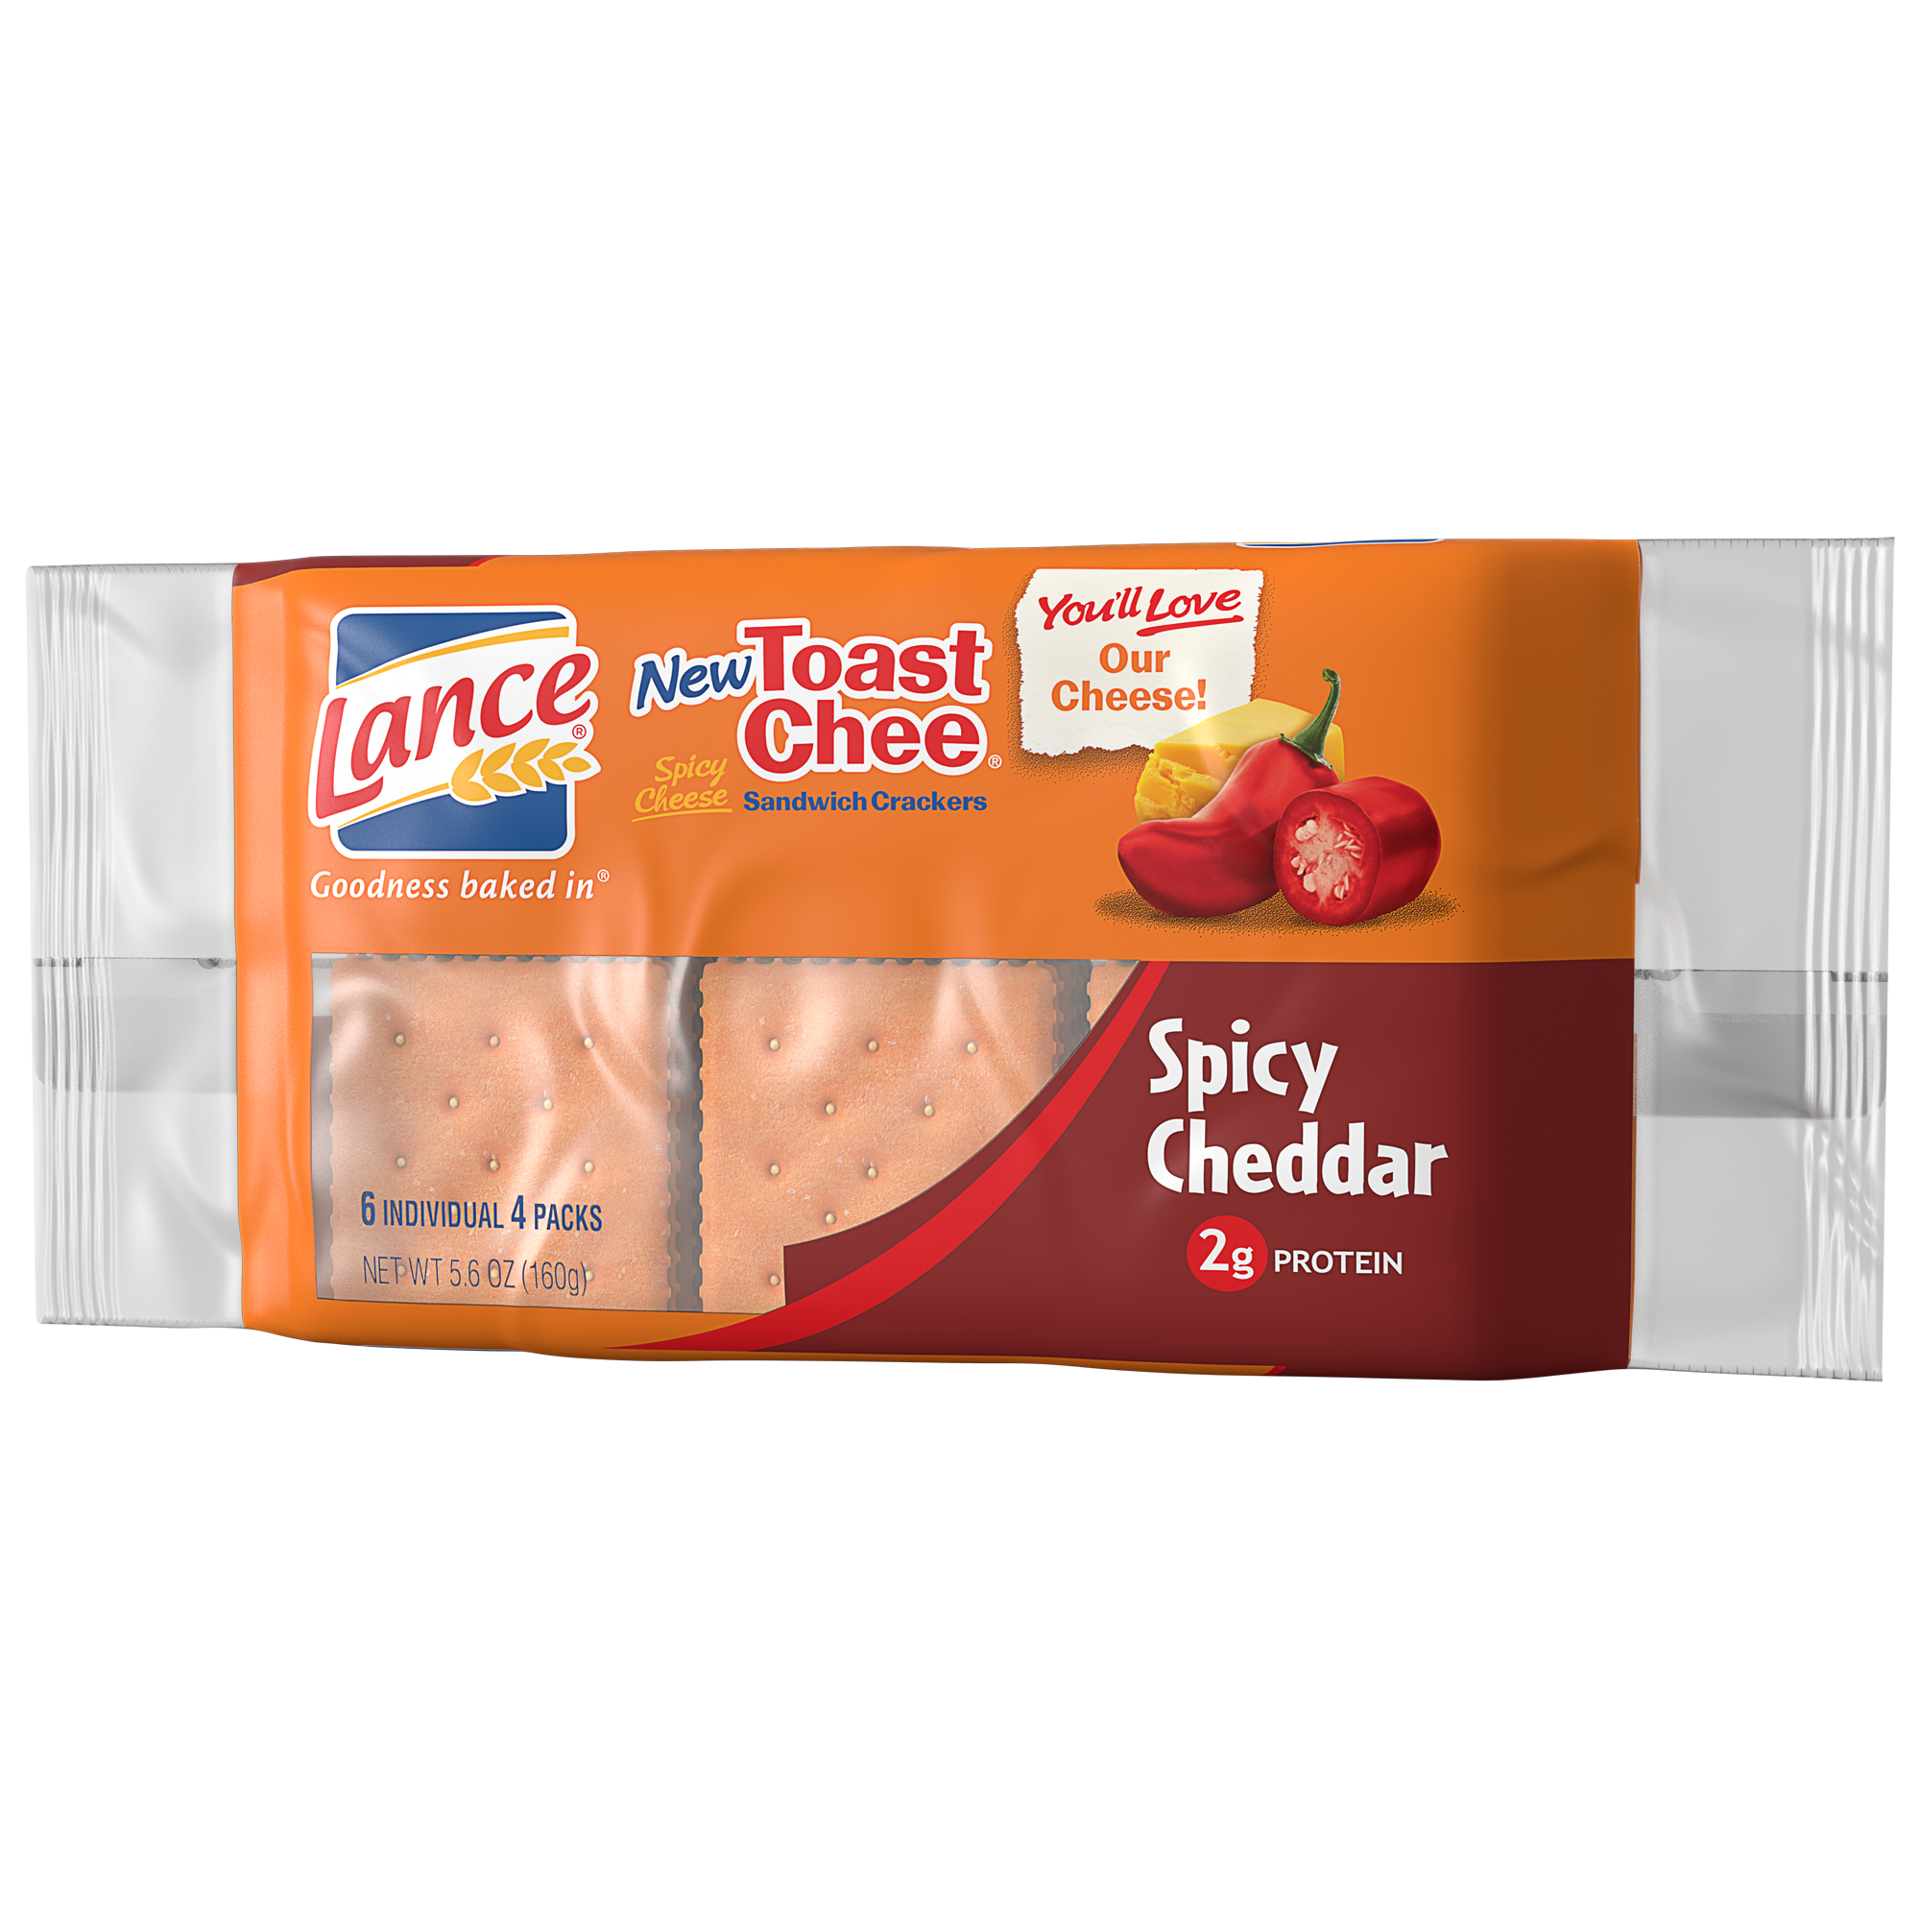 slide 10 of 10, Lance Sandwich Crackers, ToastChee Spicy Cheddar, 6 On-the-Go Packs, 4 Sandwiches Each, 5.6 oz